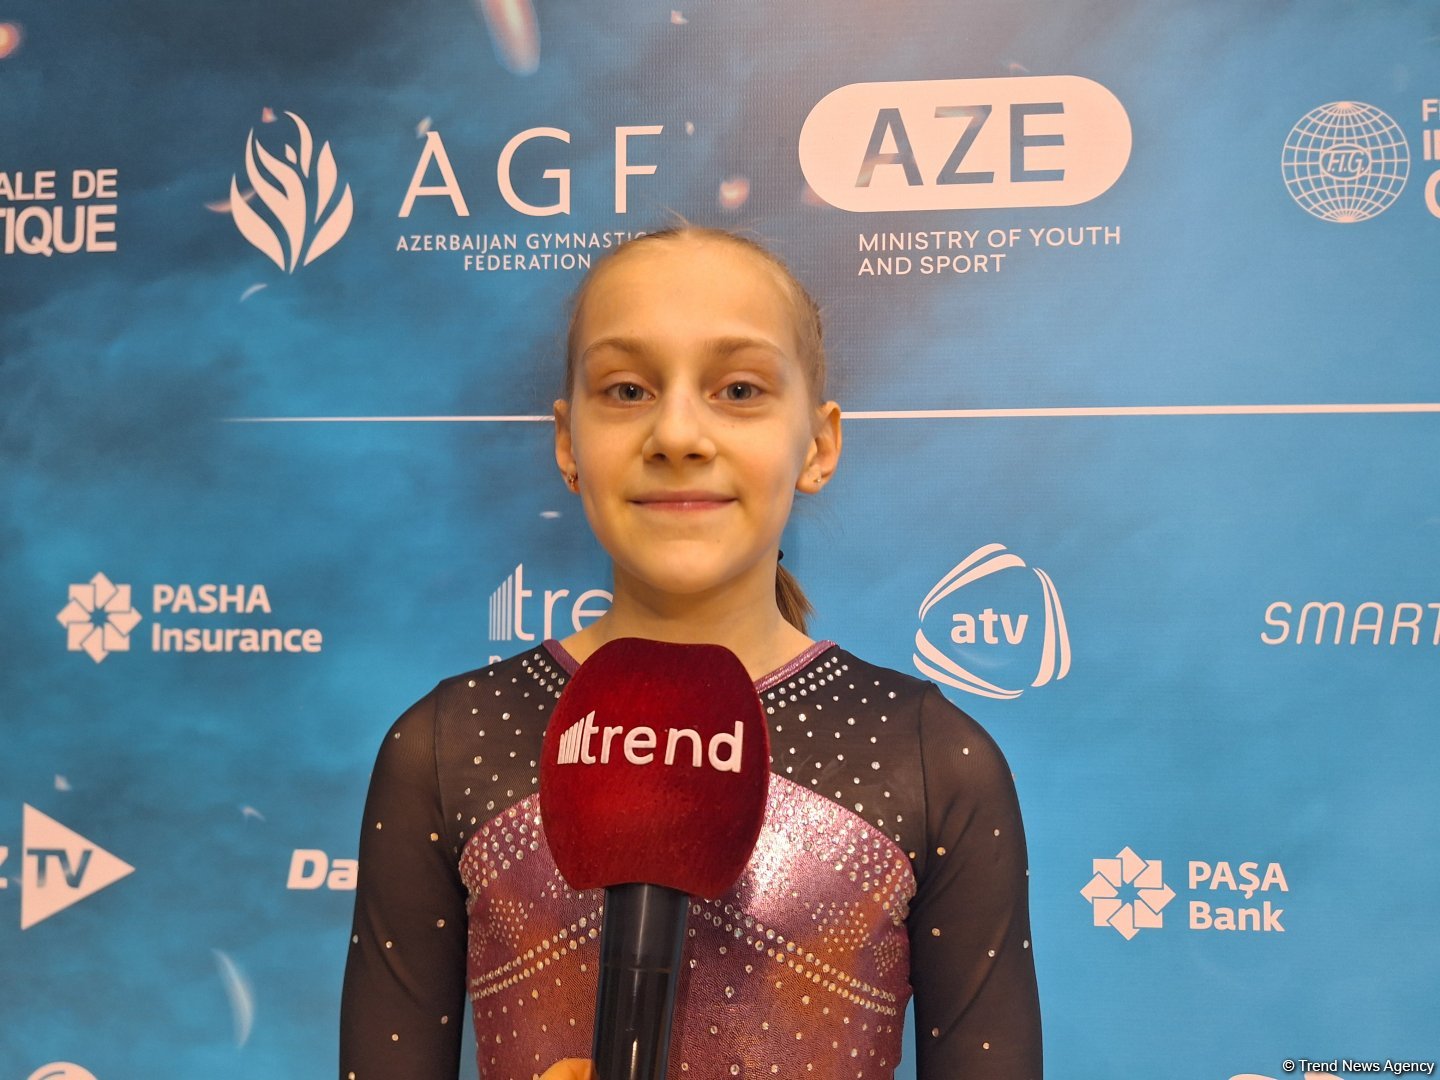 Everyone tries to show worthy result at AGF Trophy tournament - Kazakh athlete